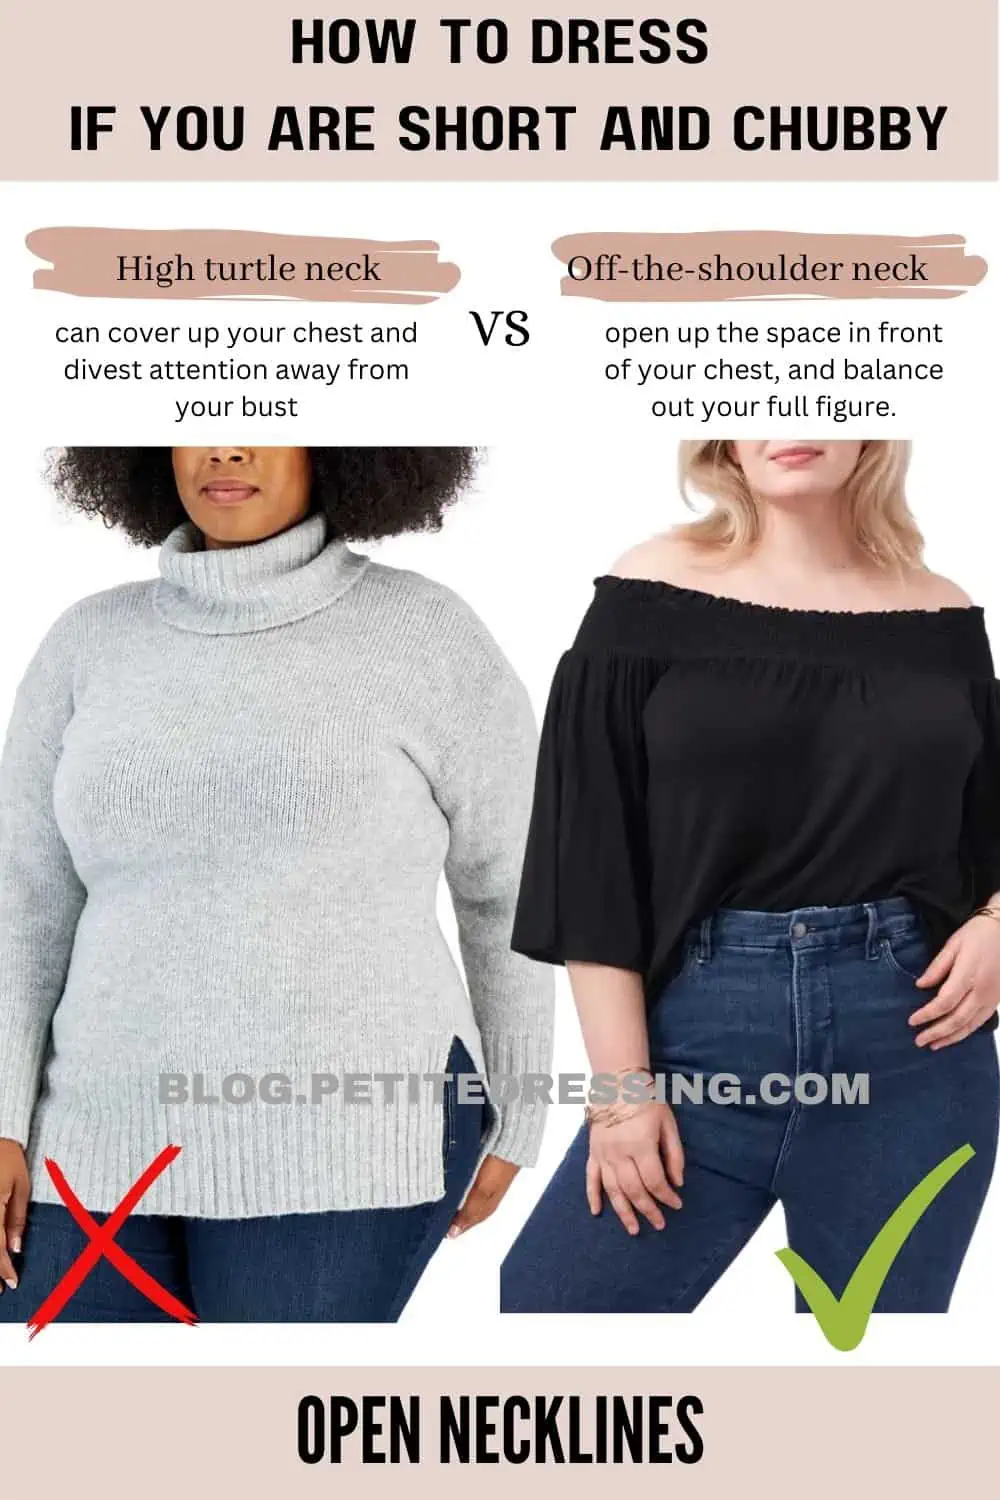 Extended Sizes Versus Plus Sizes: A Better Solution or Just More Confusion?